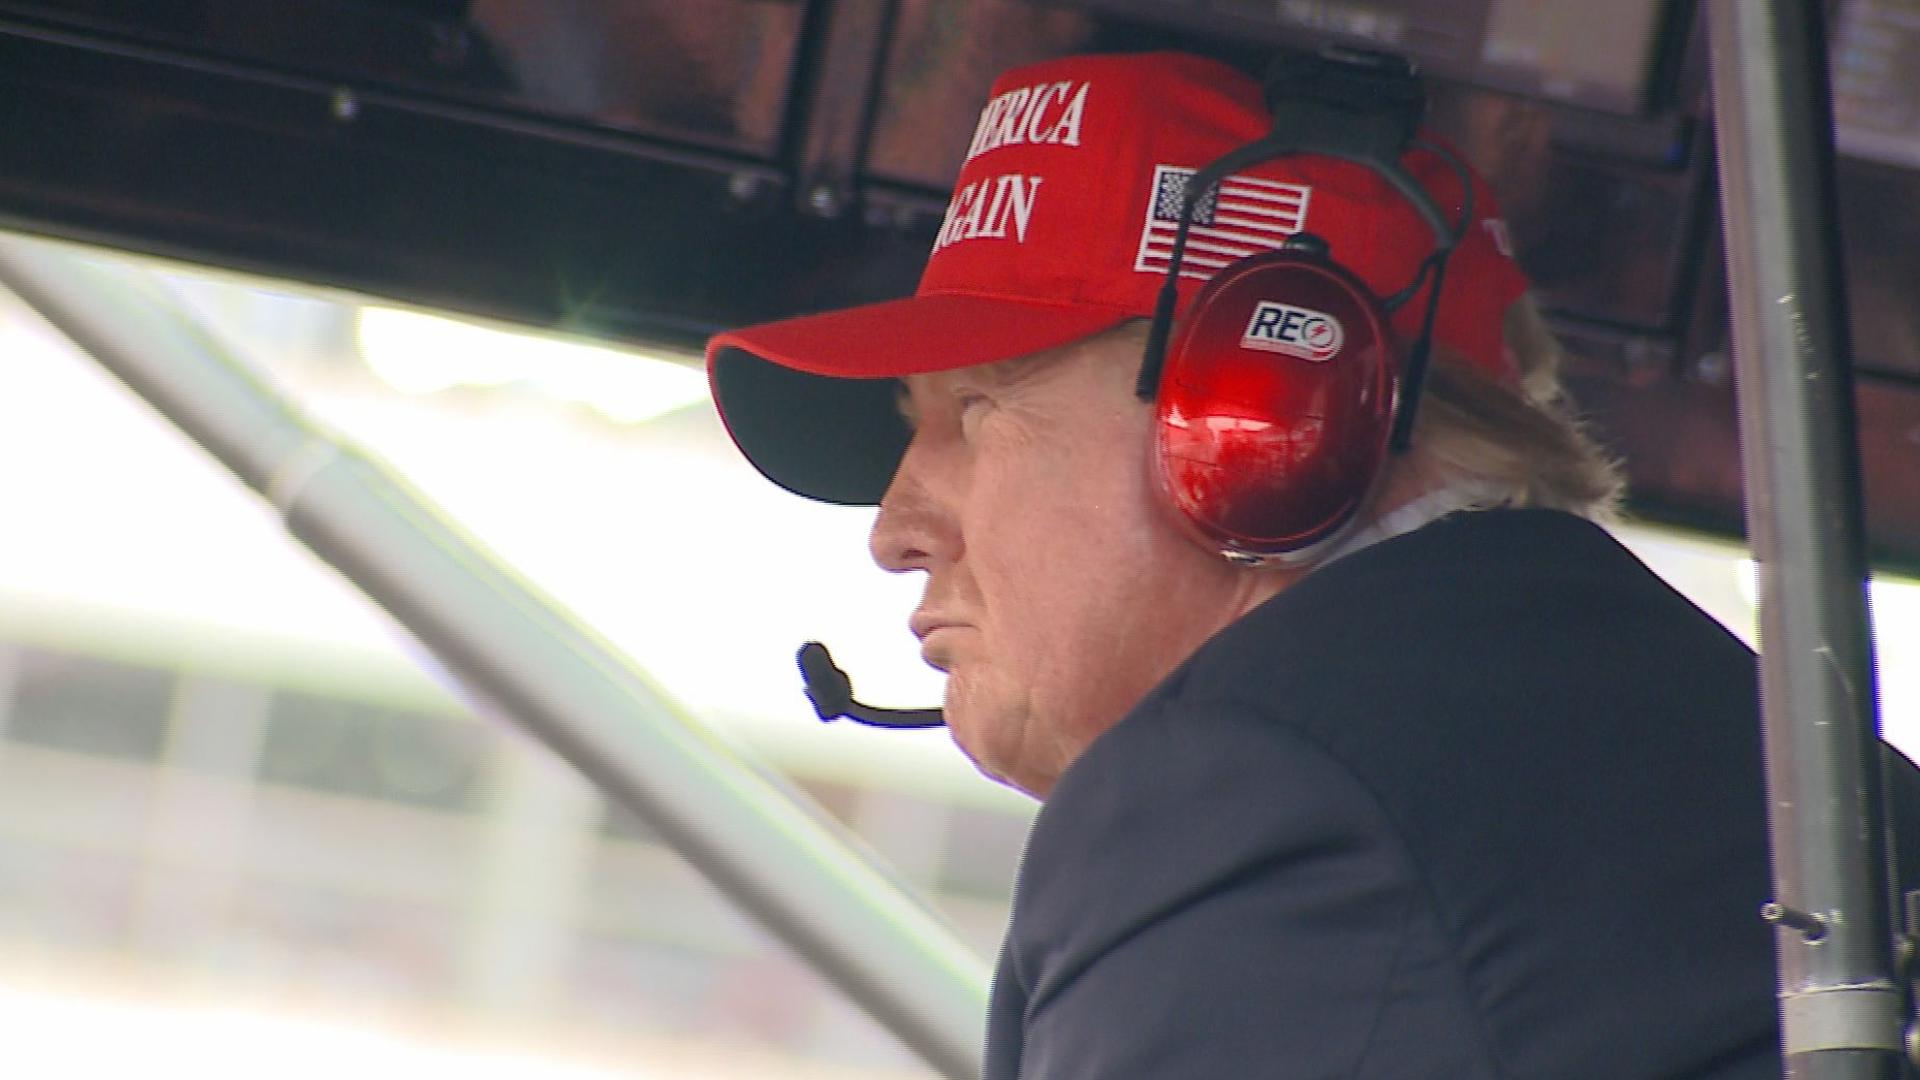 He was watching with Richard Childress atop Austin Dillon’s pit box.